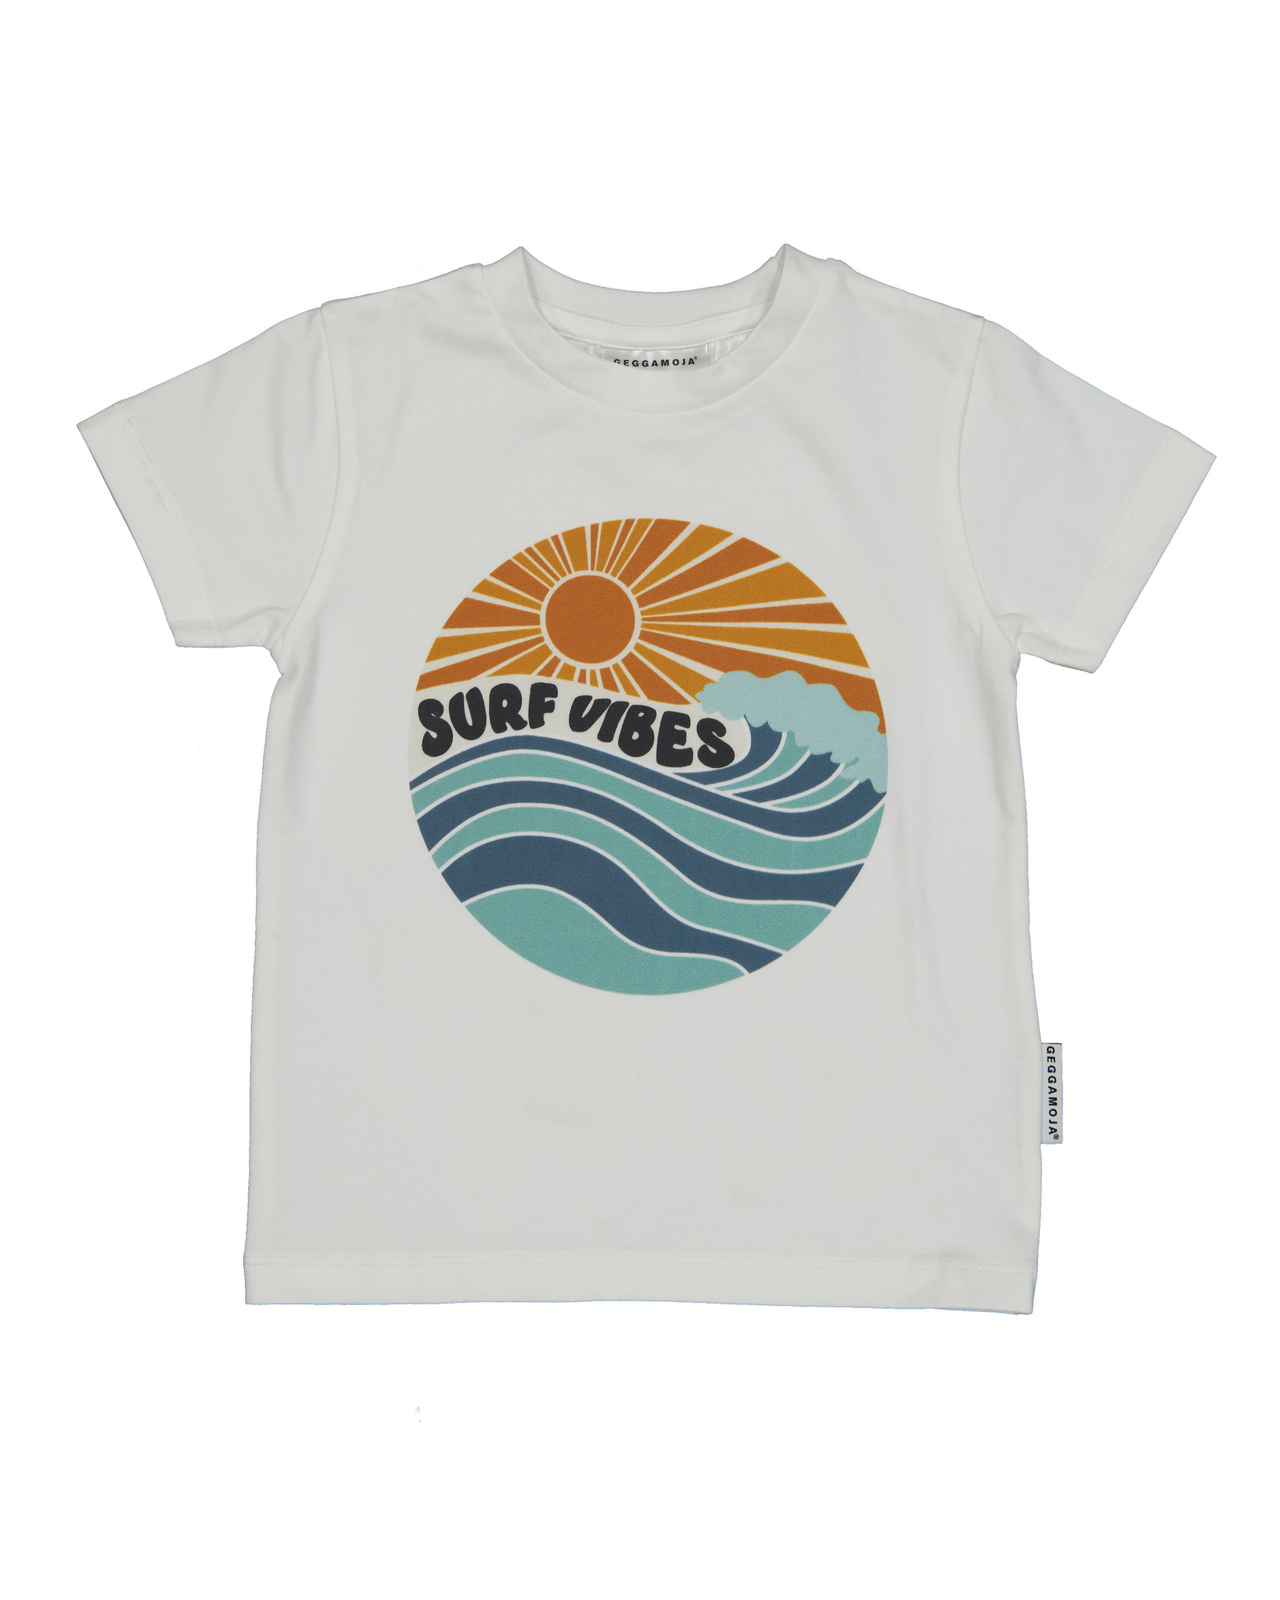 T-shirt Surf vibes Offwhite 134/140